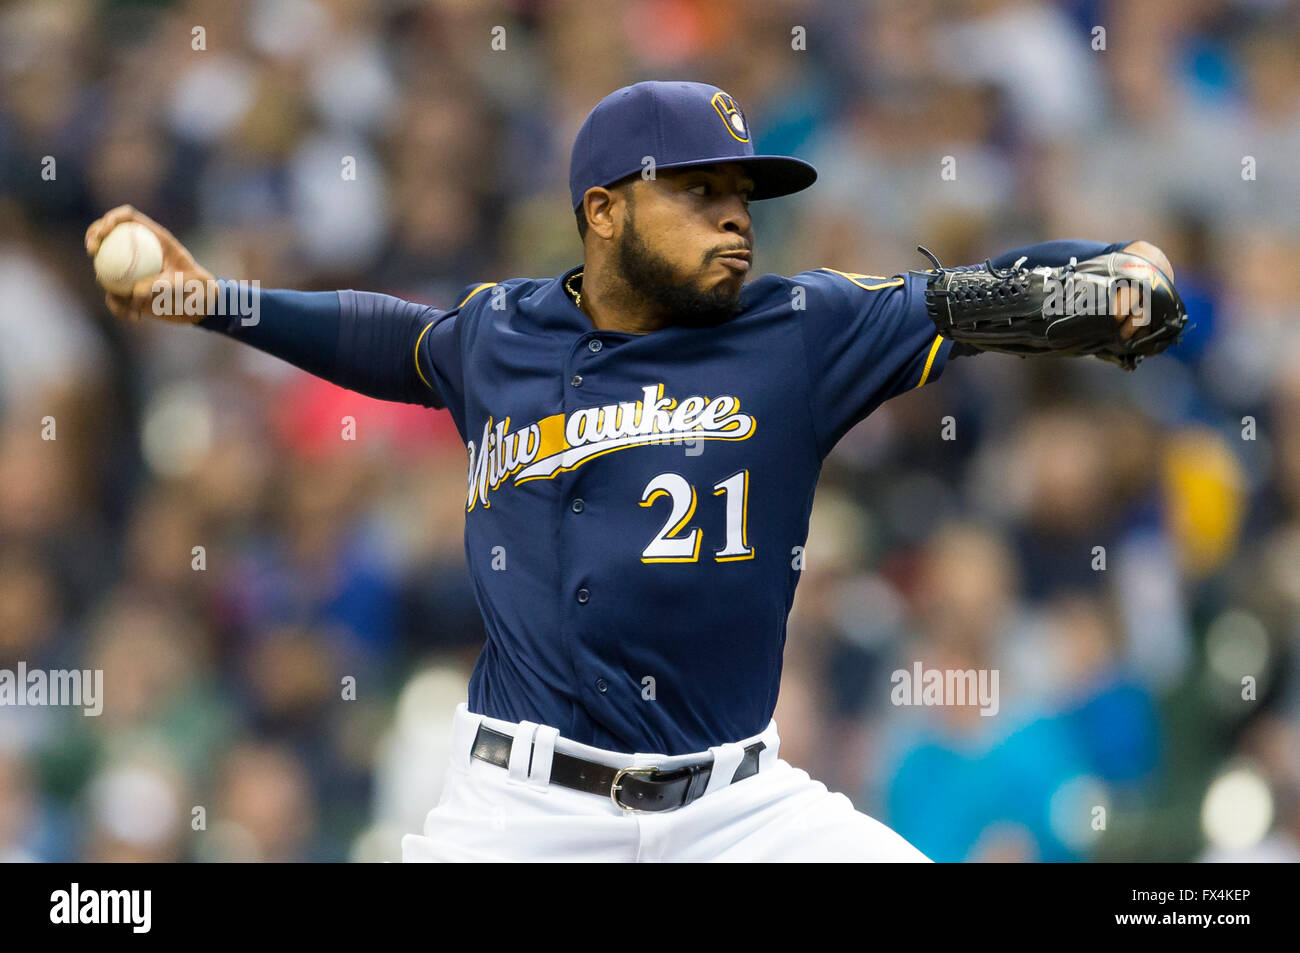 Milwaukee, WI, USA. 10th Apr, 2016. Milwaukee Brewers relief pitcher Jeremy Jeffress #21 delivers a pitch during the Major League Baseball game between the Milwaukee Brewers and the Houston Astros at Miller Park in Milwaukee, WI. John Fisher/CSM/Alamy Live News Stock Photo